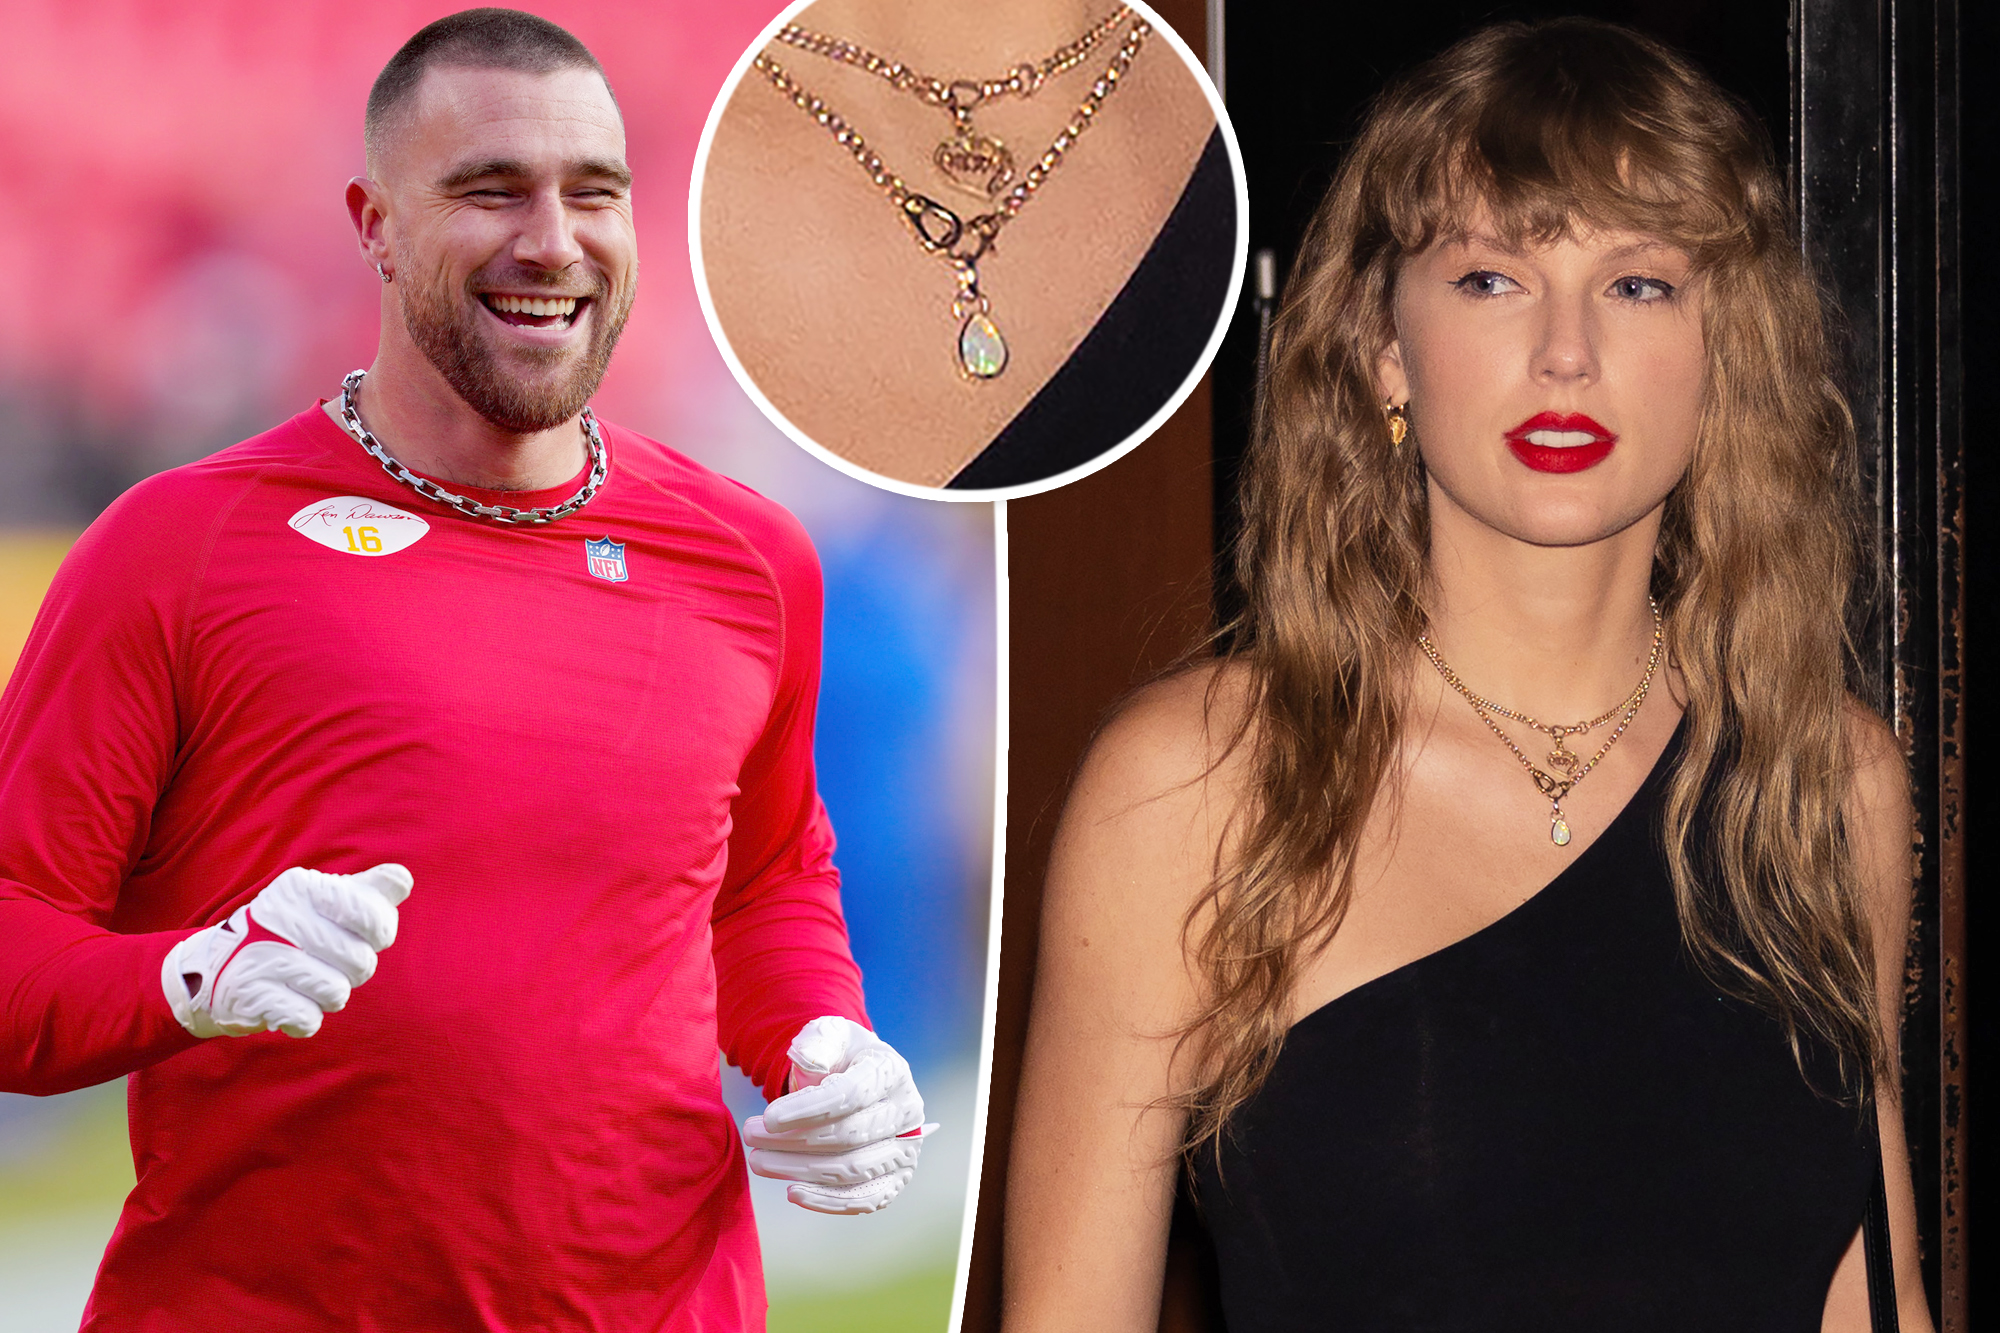 Travis Kelce delights fan's, shares adorable gift he got for Taylor Swift - Amazingly It has his name boldly written on it